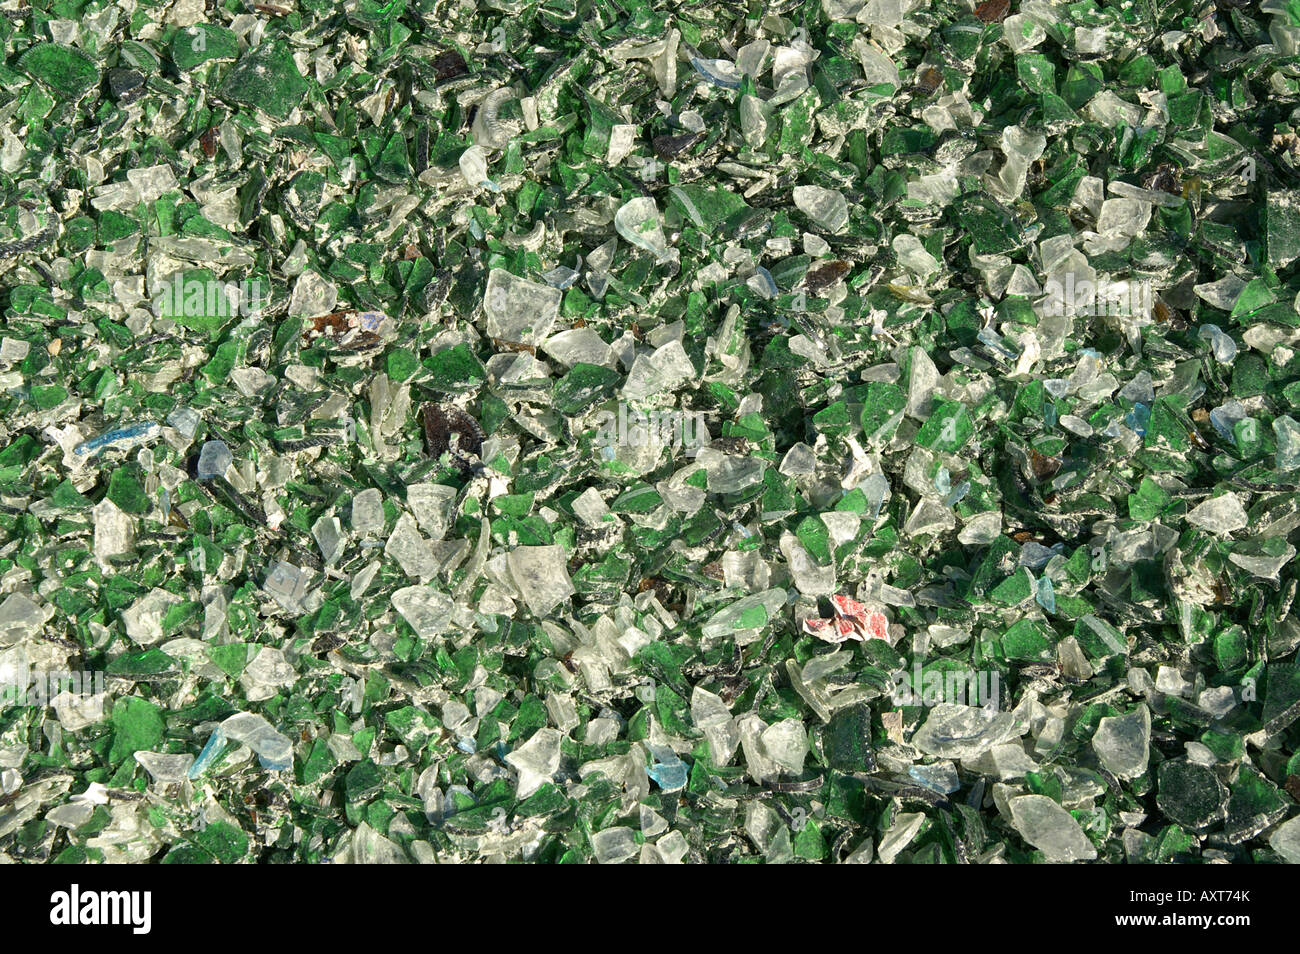 Pieces of green and white glass at recycling plant / Grüne und weiße Glasbruchstücke in Altglasrecyclingfrima Stock Photo